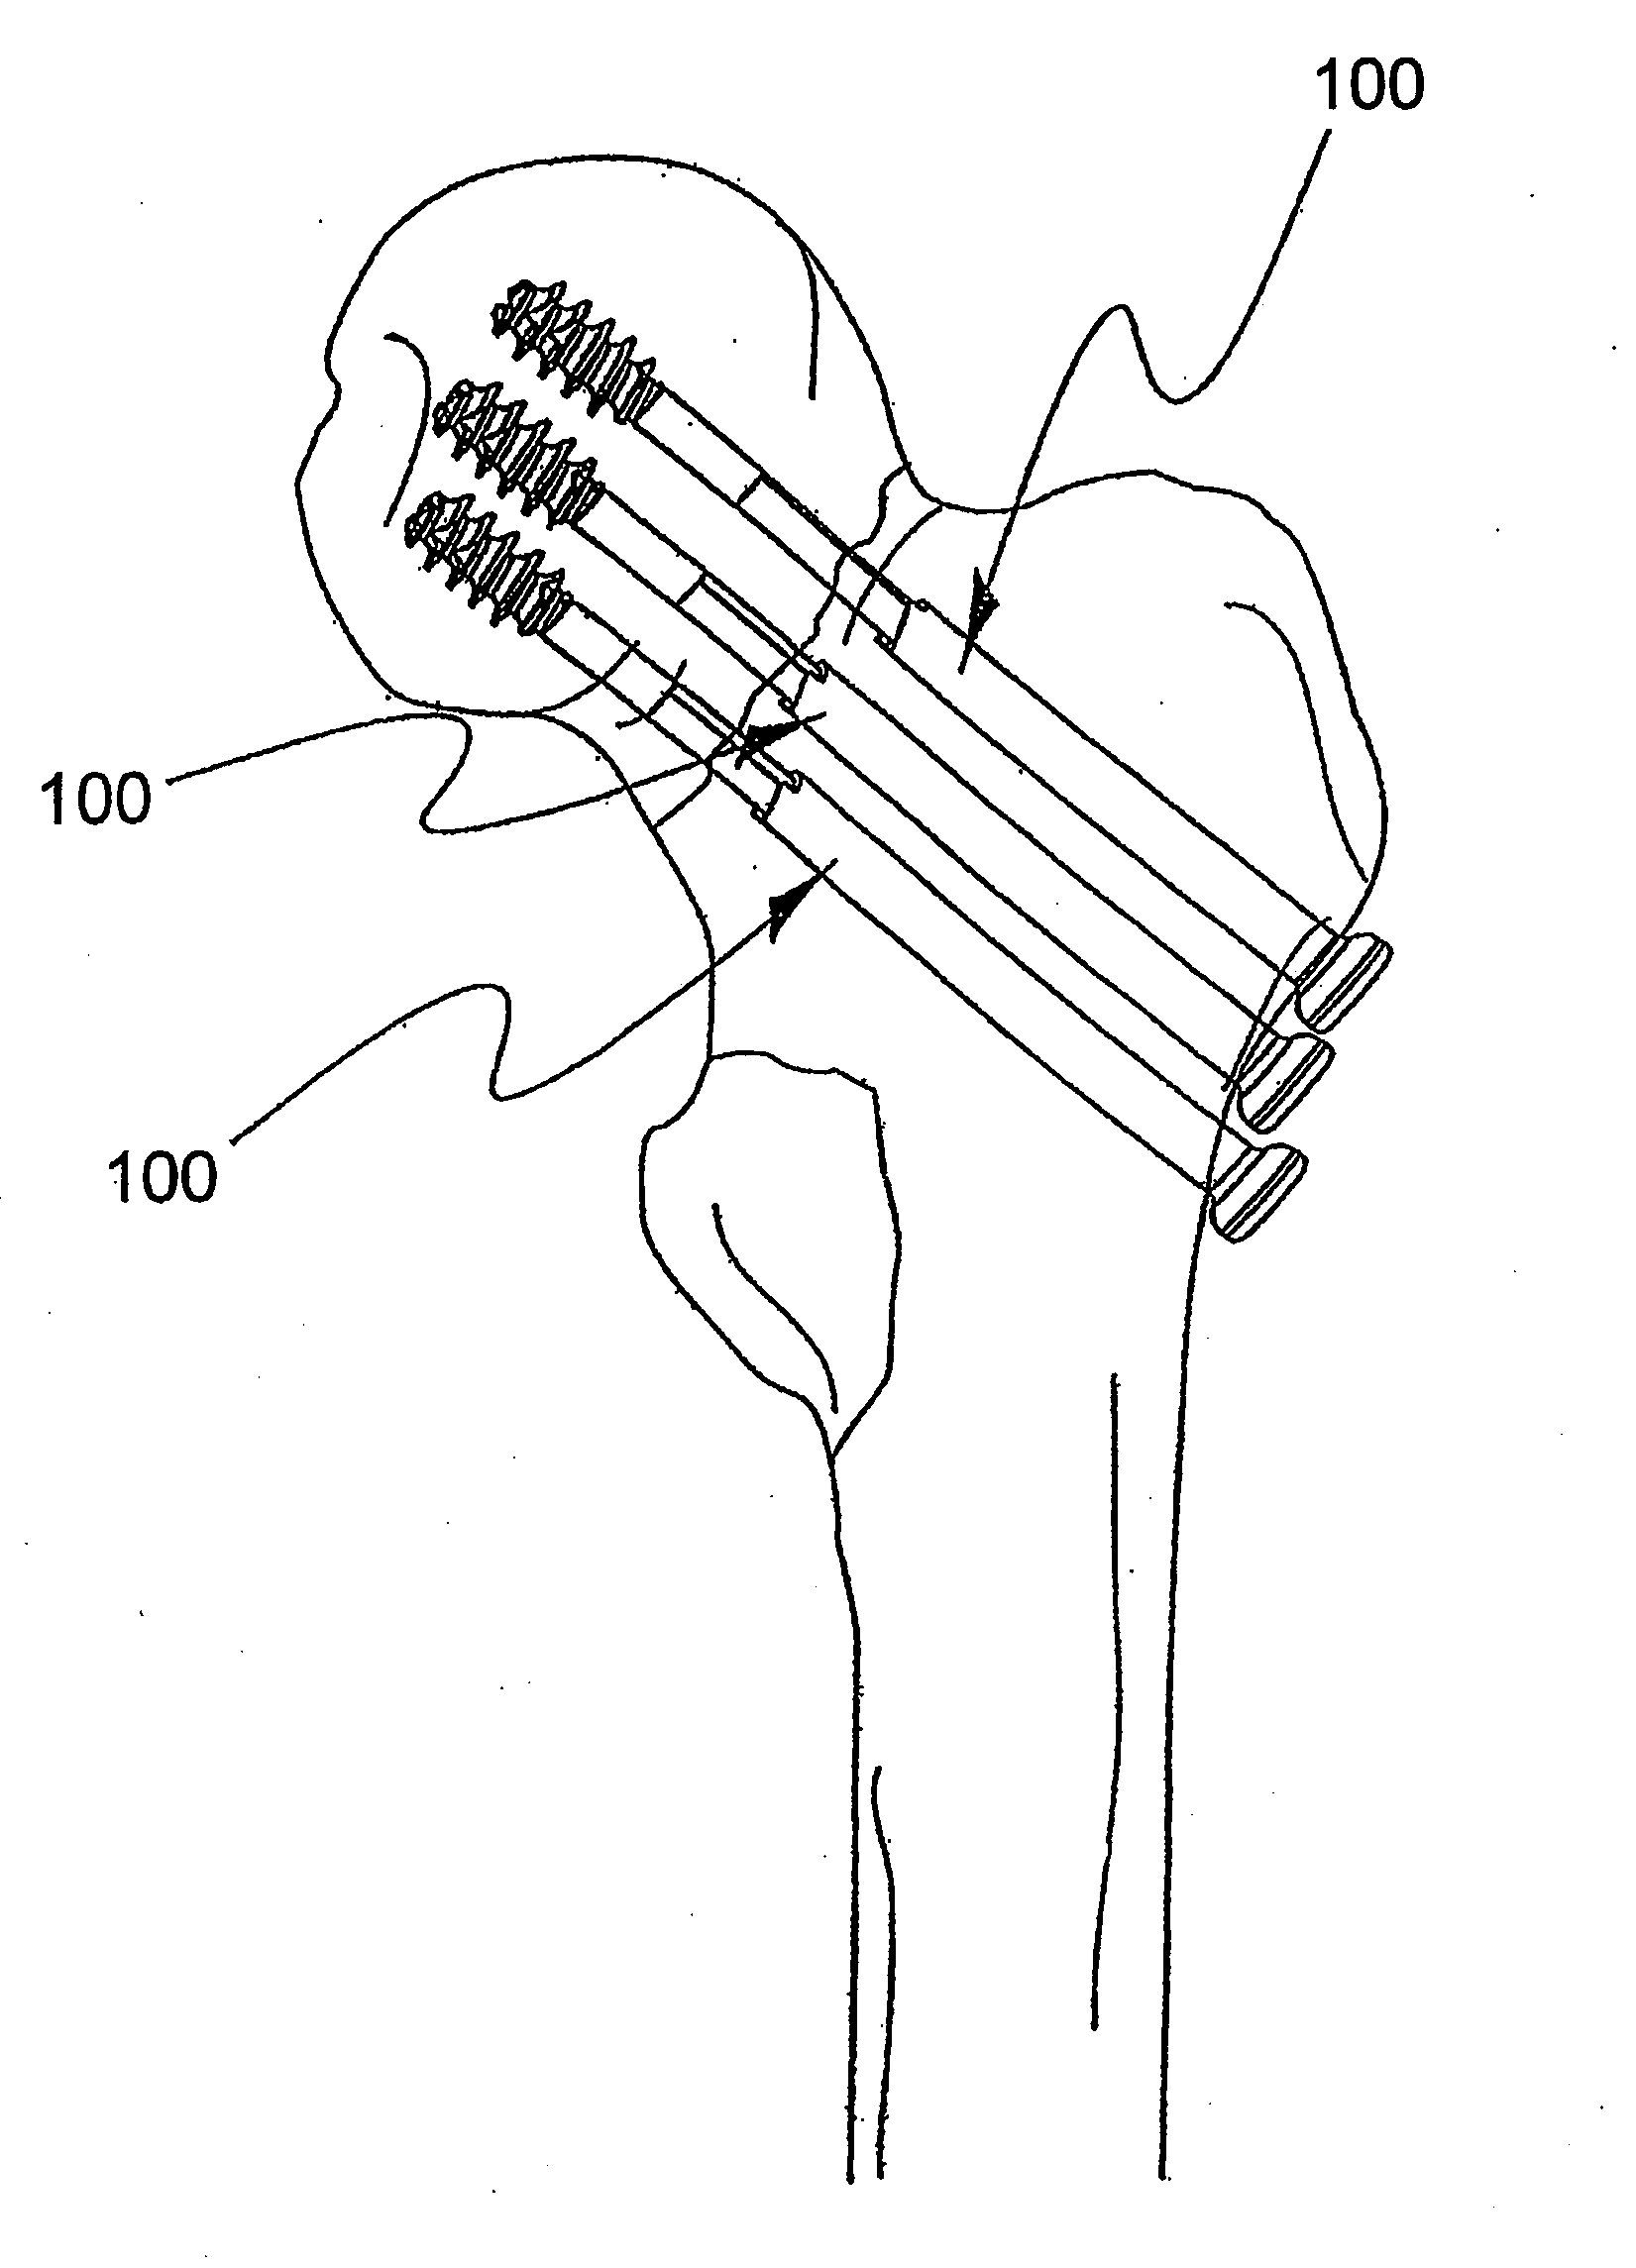 Stabilization system and method for the fixation of bone fractures